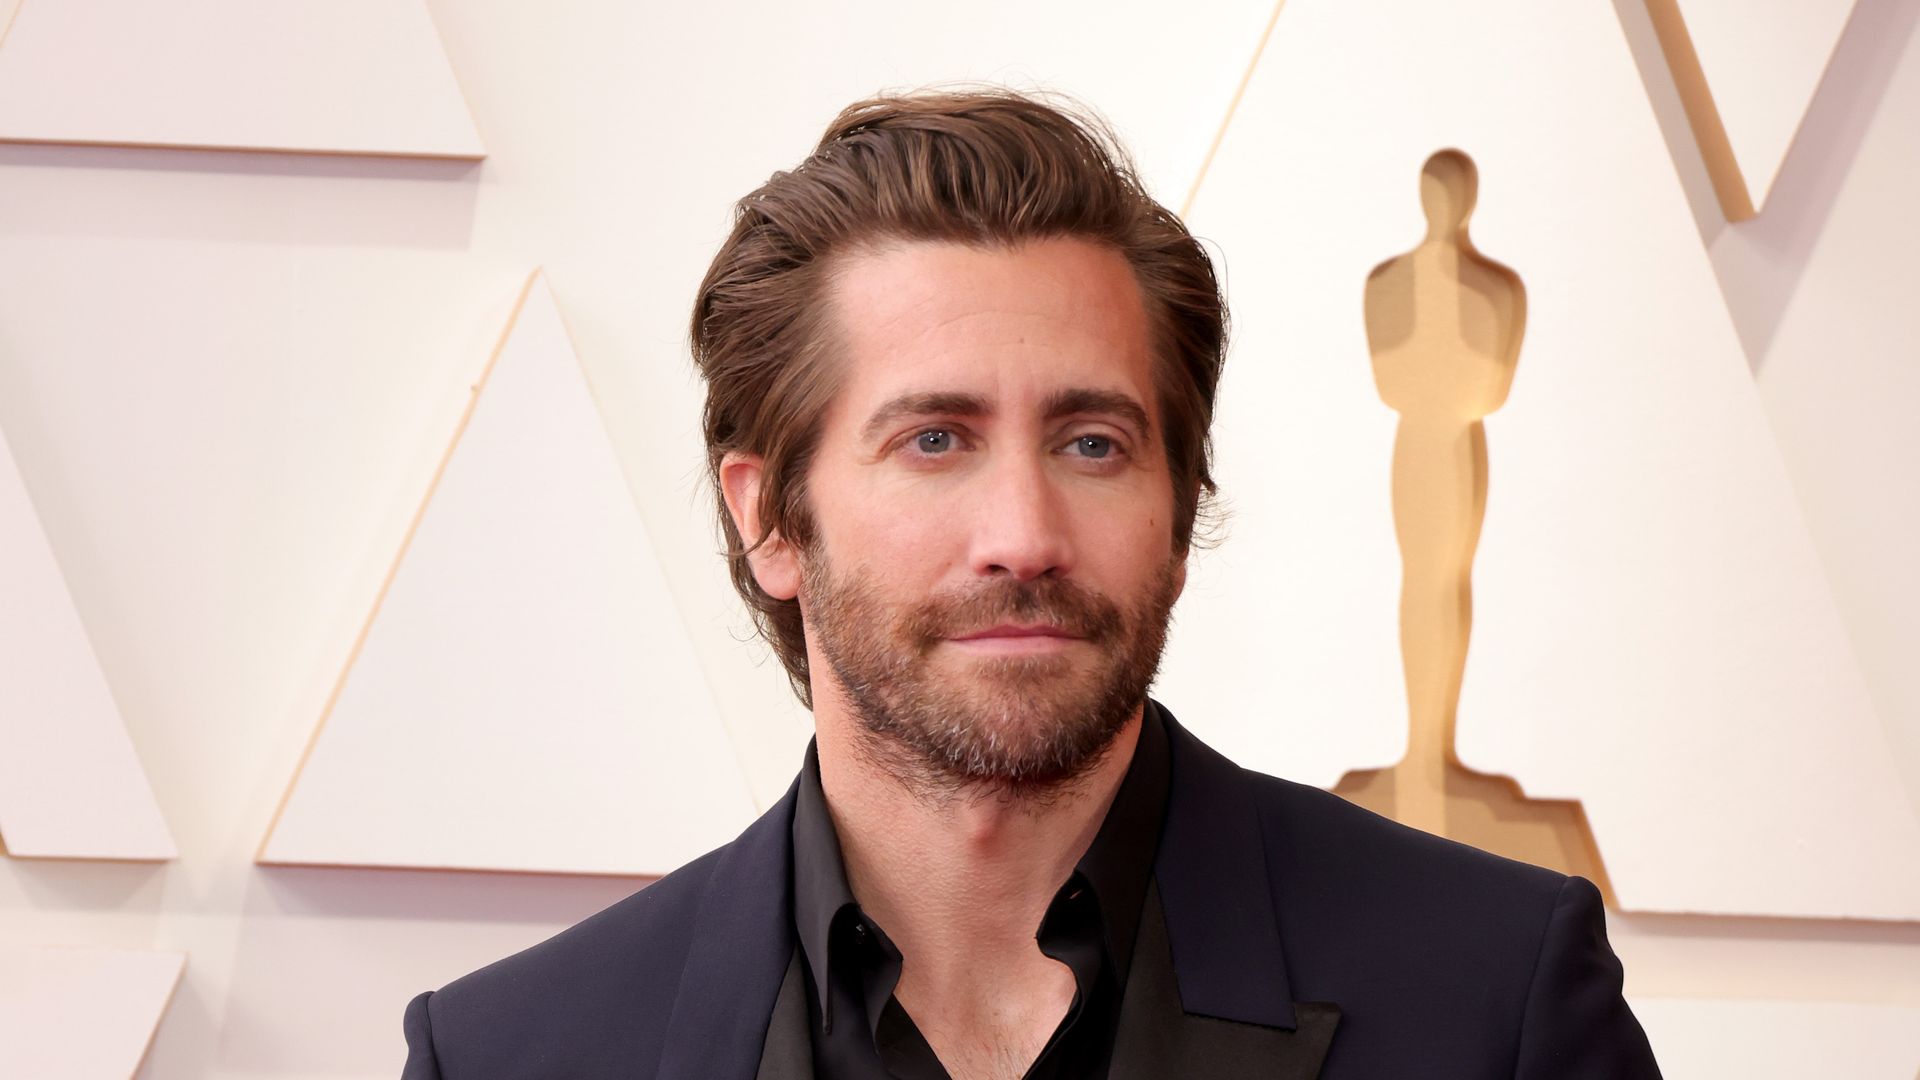 Jake Gyllenhaal attends the 94th Annual Academy Awards at Hollywood and Highland on March 27, 2022 in Hollywood, California